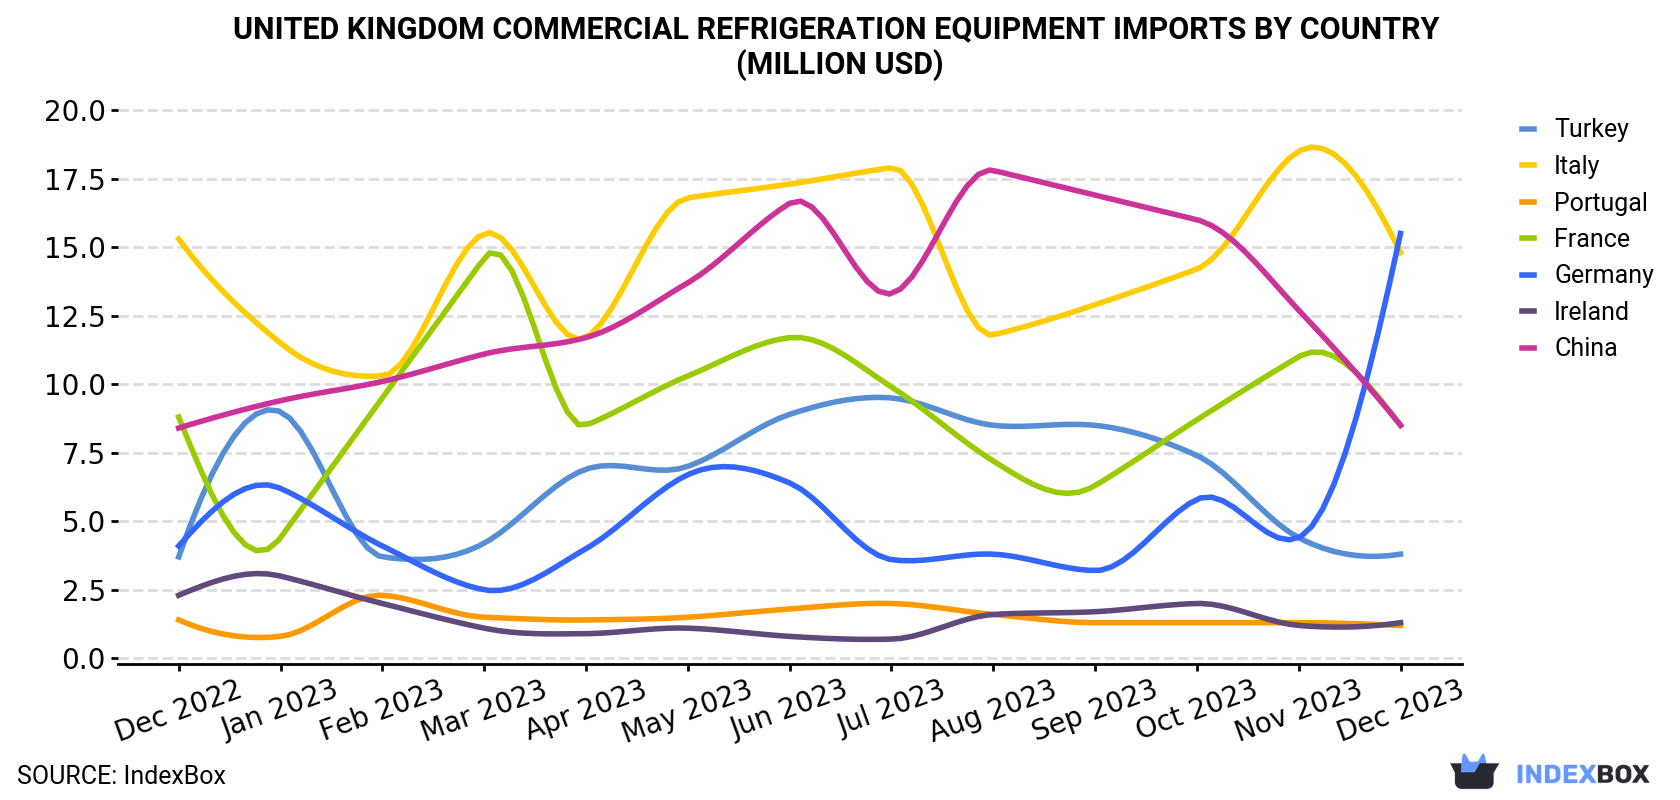 United Kingdom Commercial Refrigeration Equipment Imports By Country (Million USD)